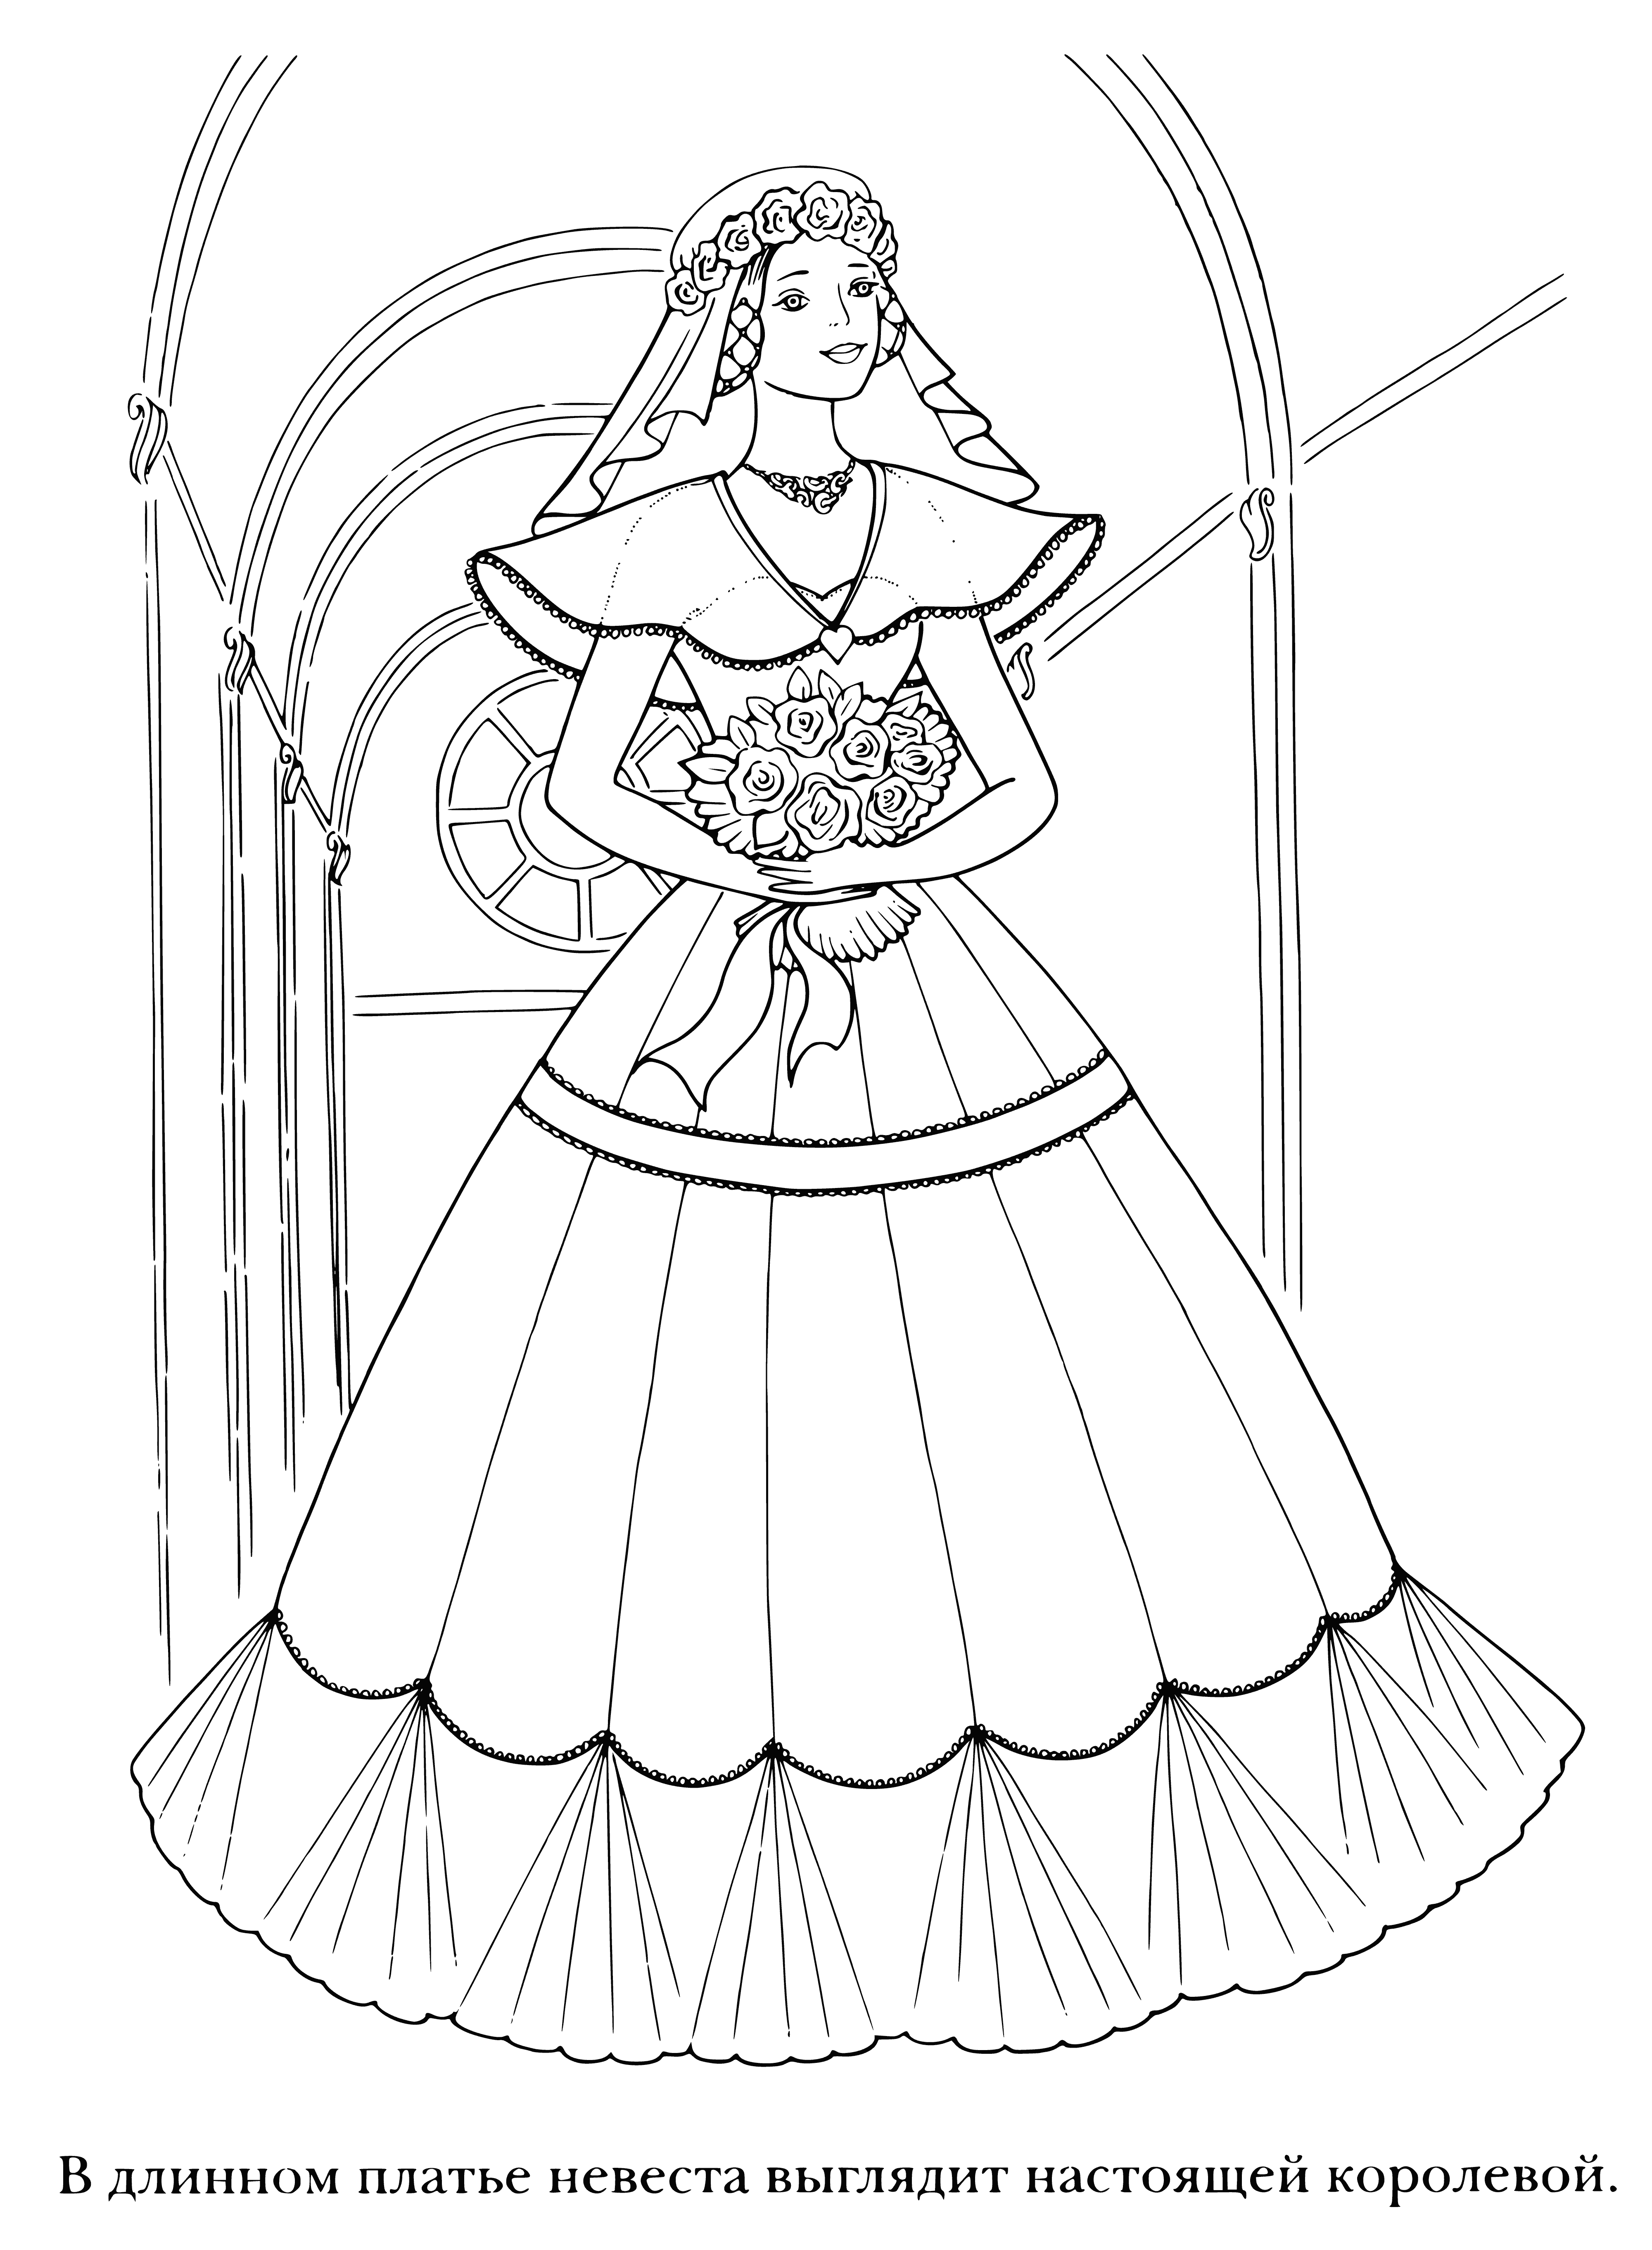 coloring page: Woman in white dress stands at window, veil on head, flowers in hands.